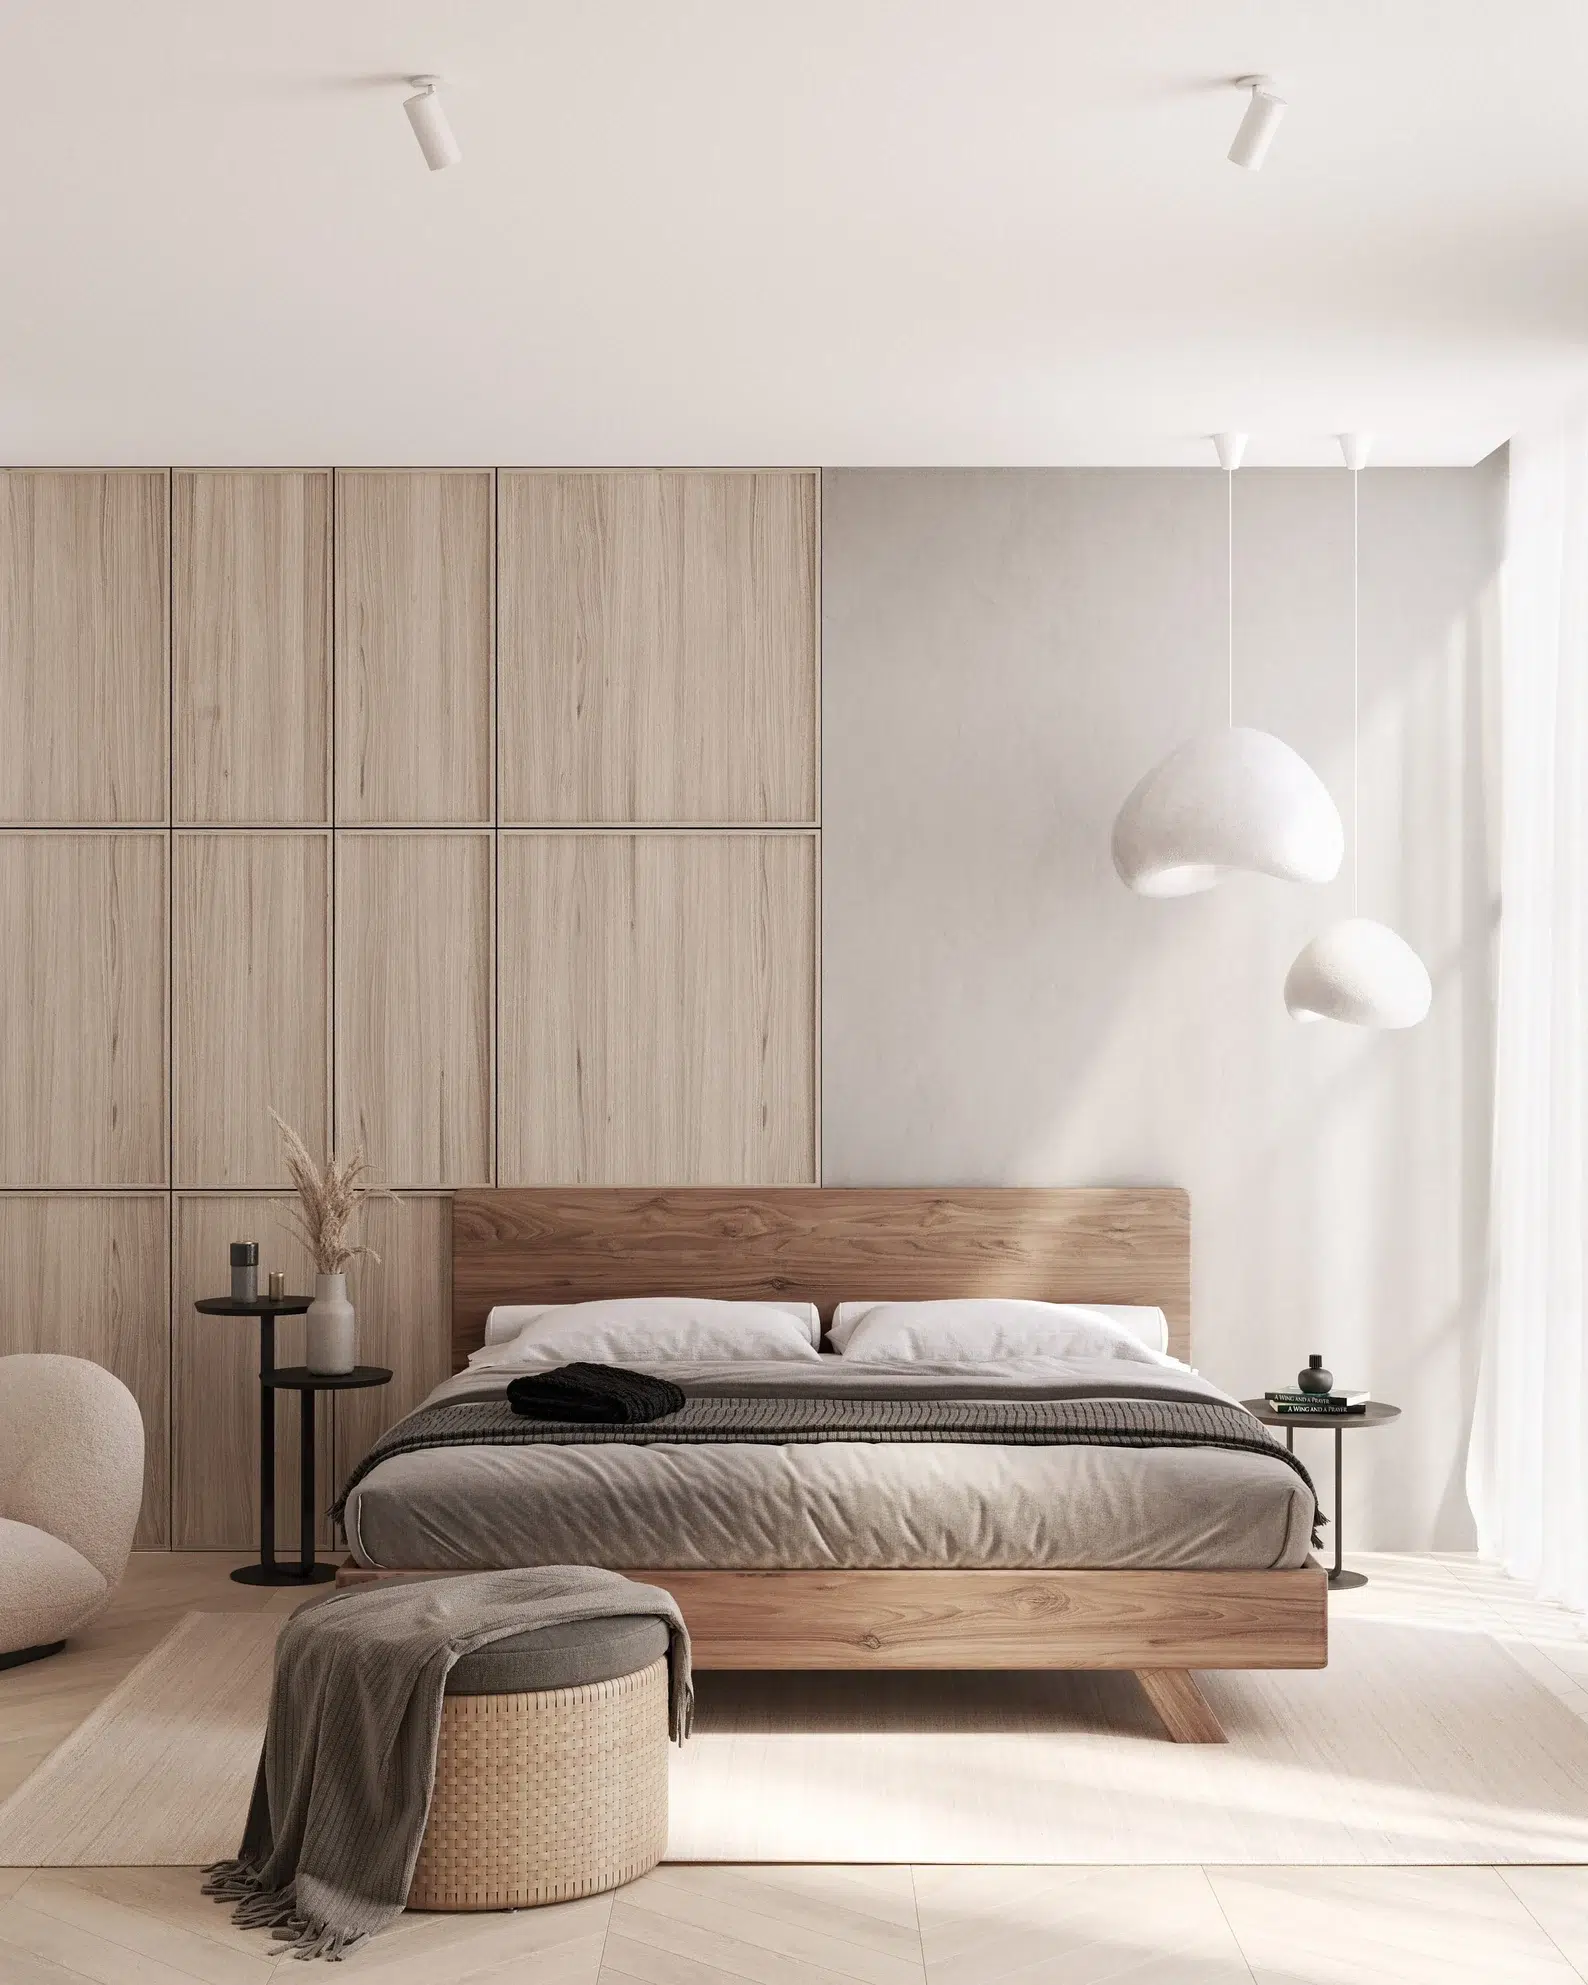 A wooden bedframe from Mobello Furniture